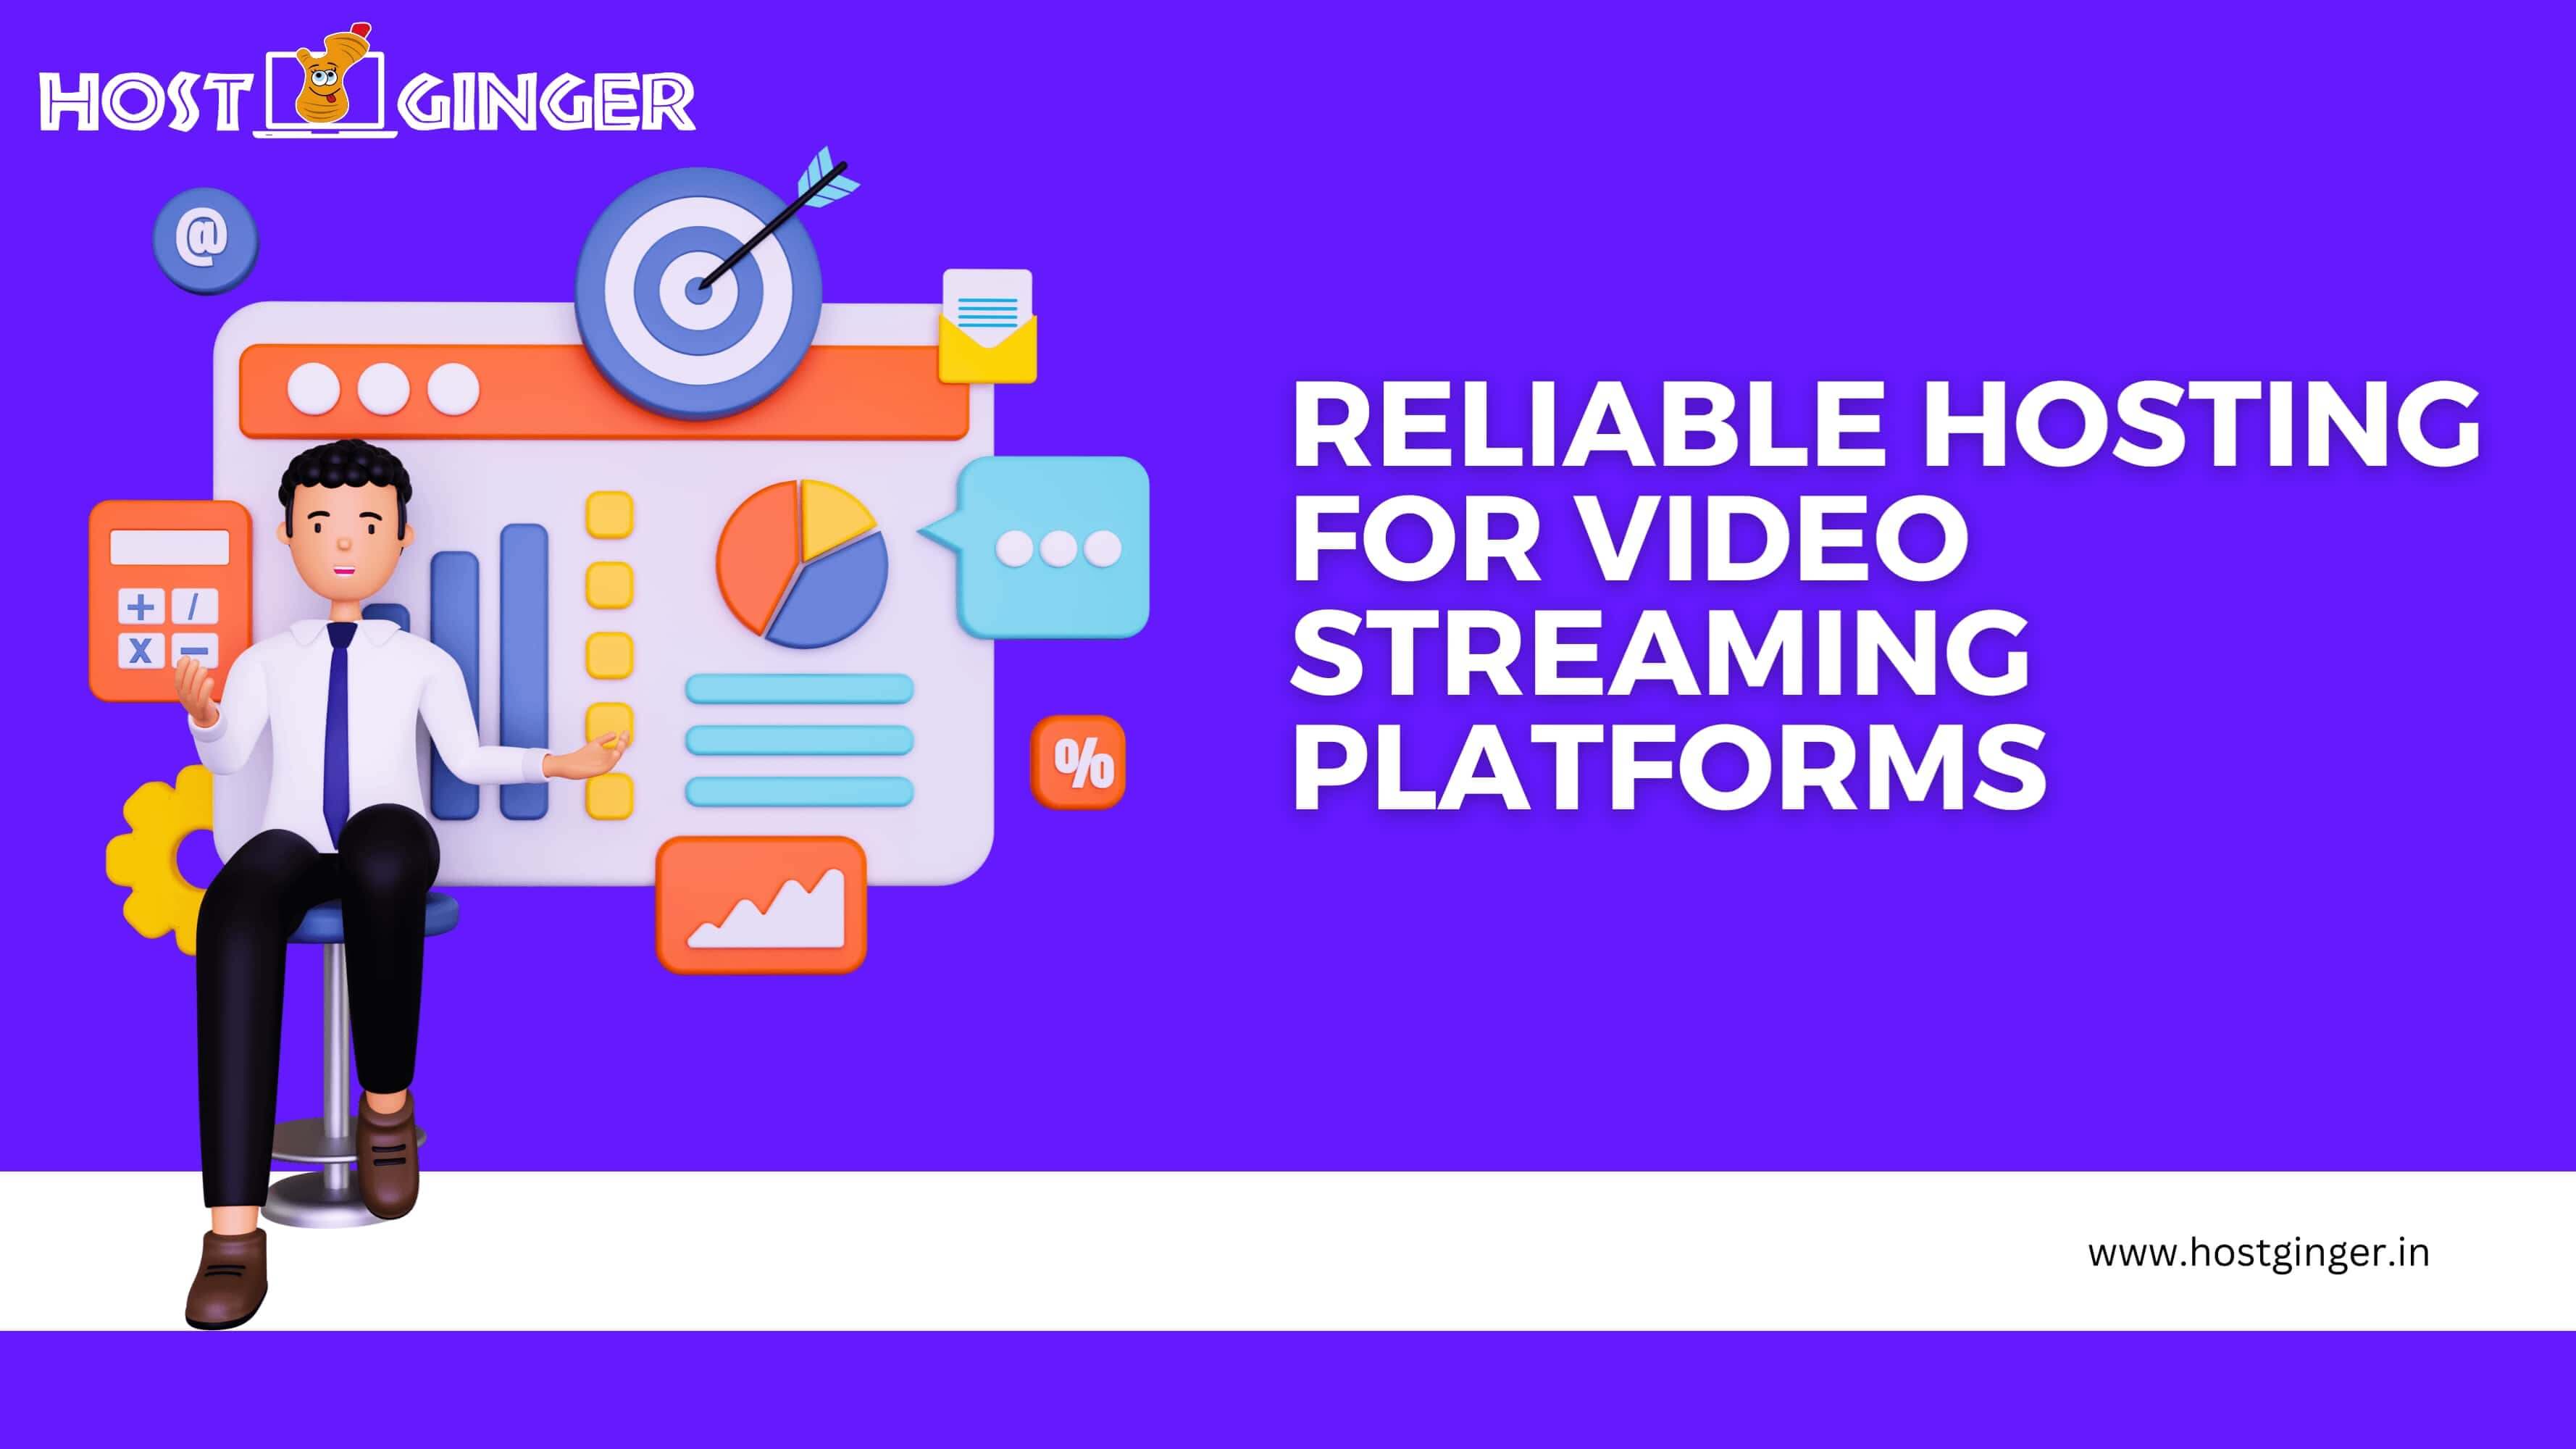 Reliable hosting for video streaming platforms